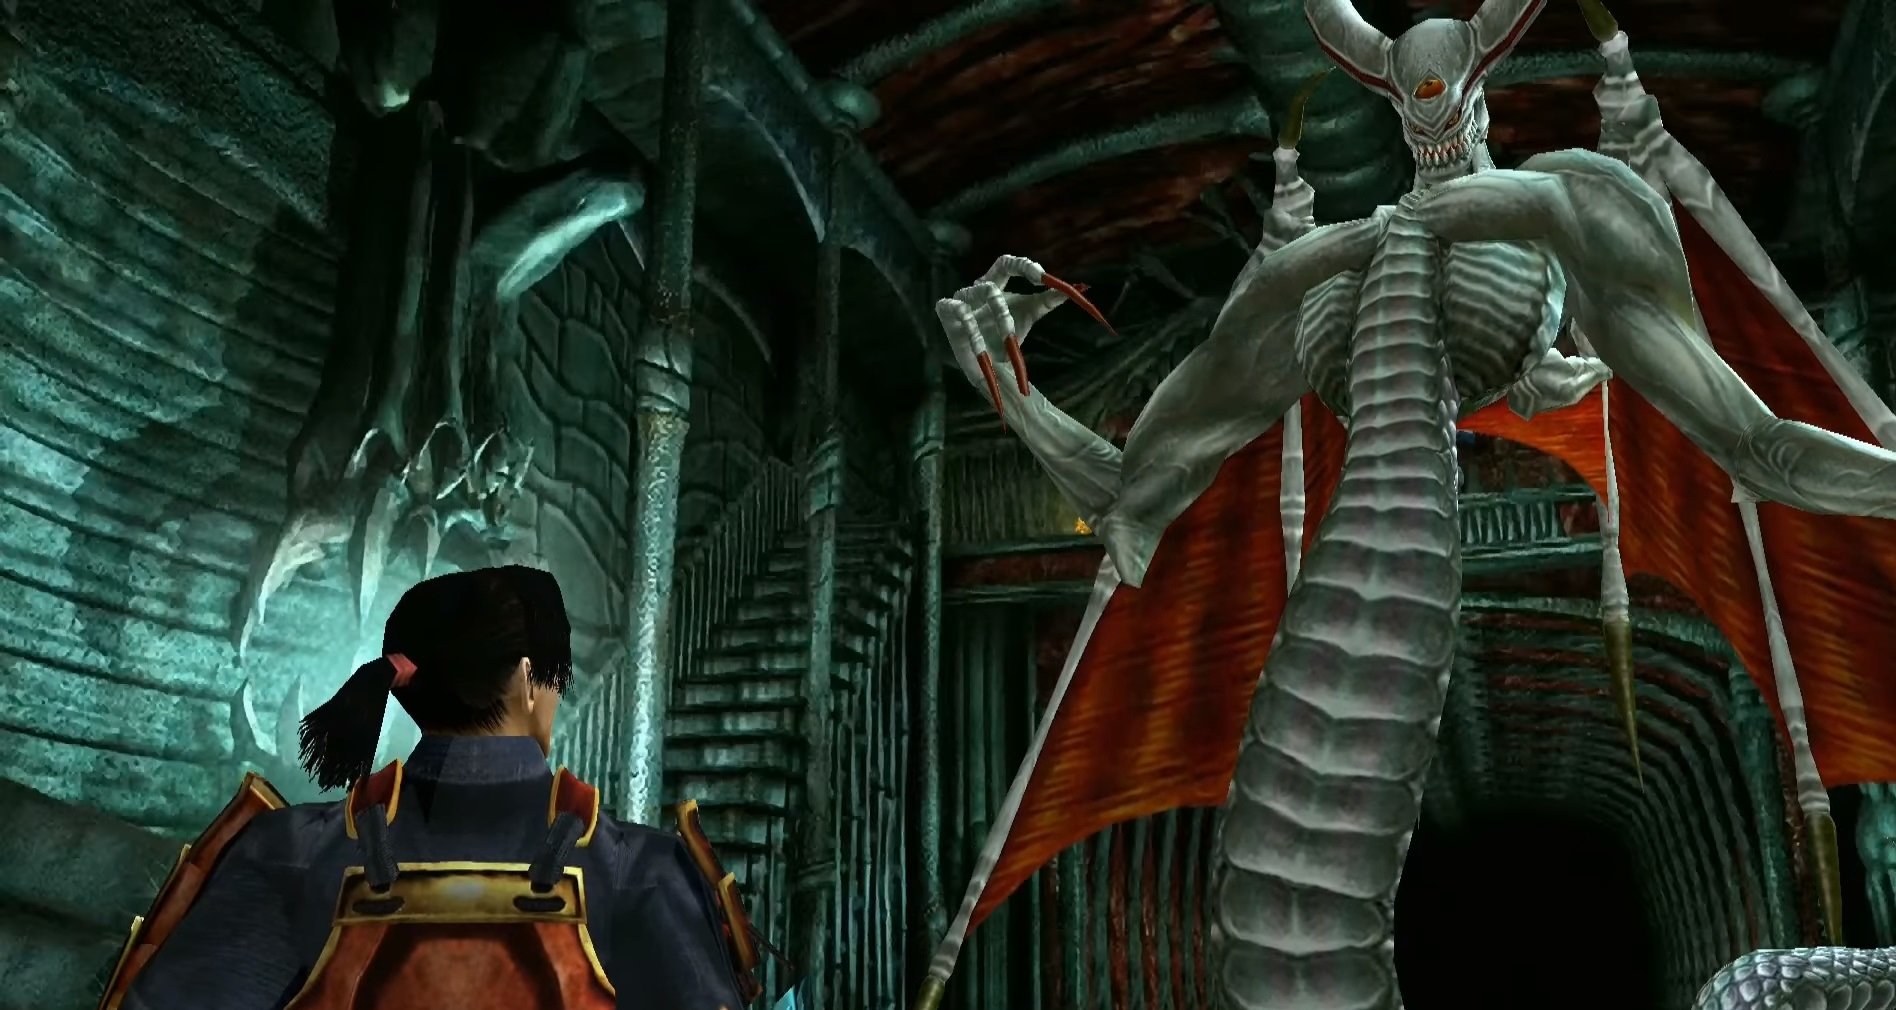 Fortinbras from Onimusha: Warlords.